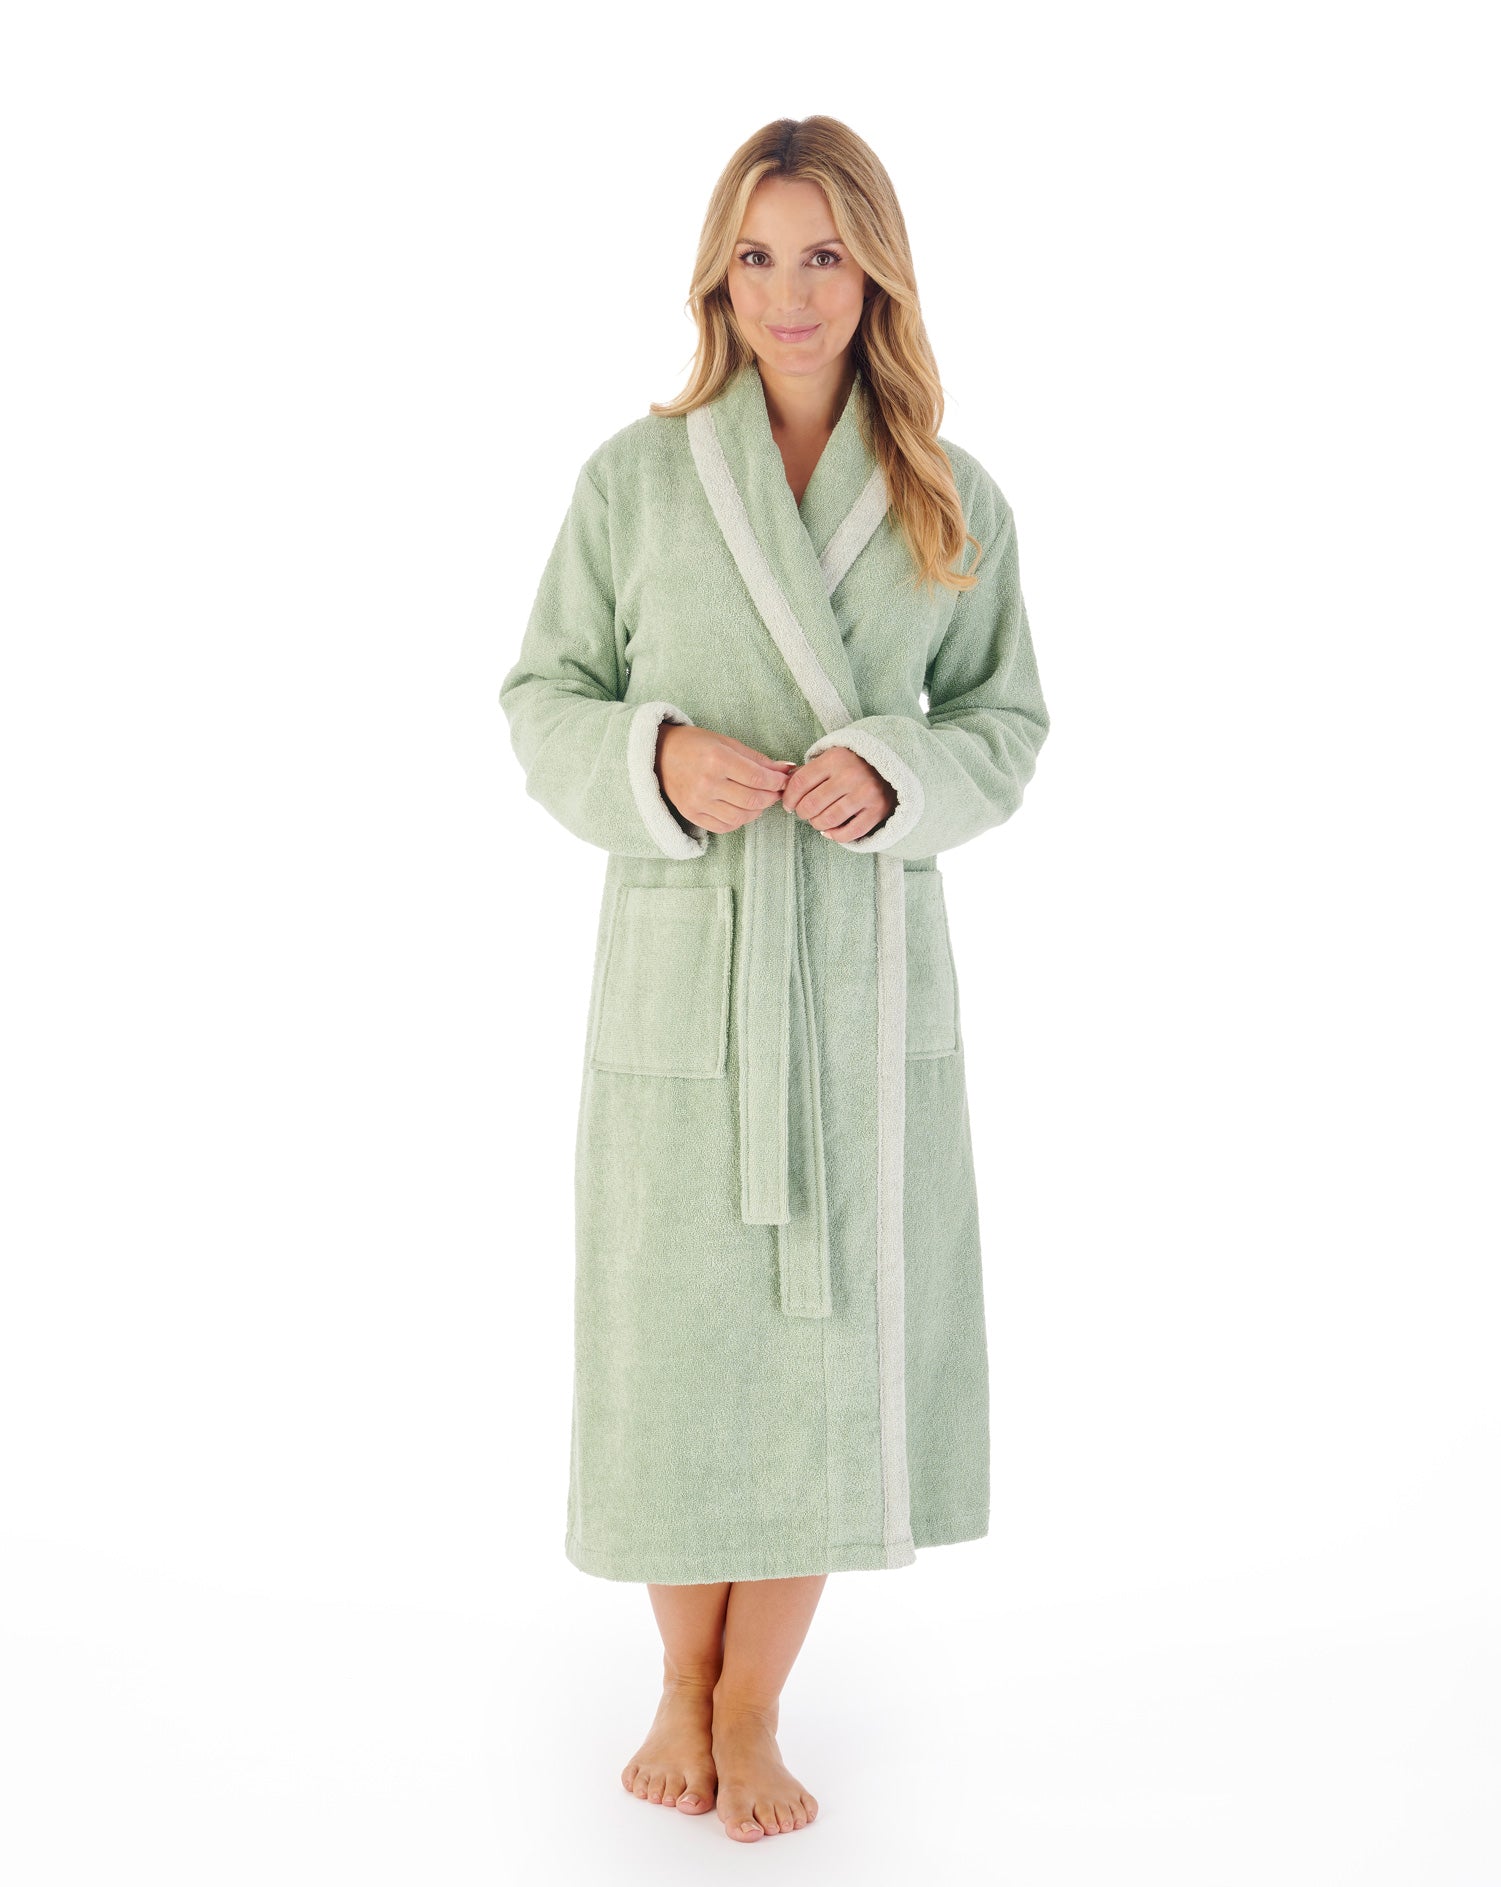 BY LORA Cotton Kimono Adult Robes terry Kimono Cover up, Apple Green, One  Size Size at Amazon Women's Clothing store